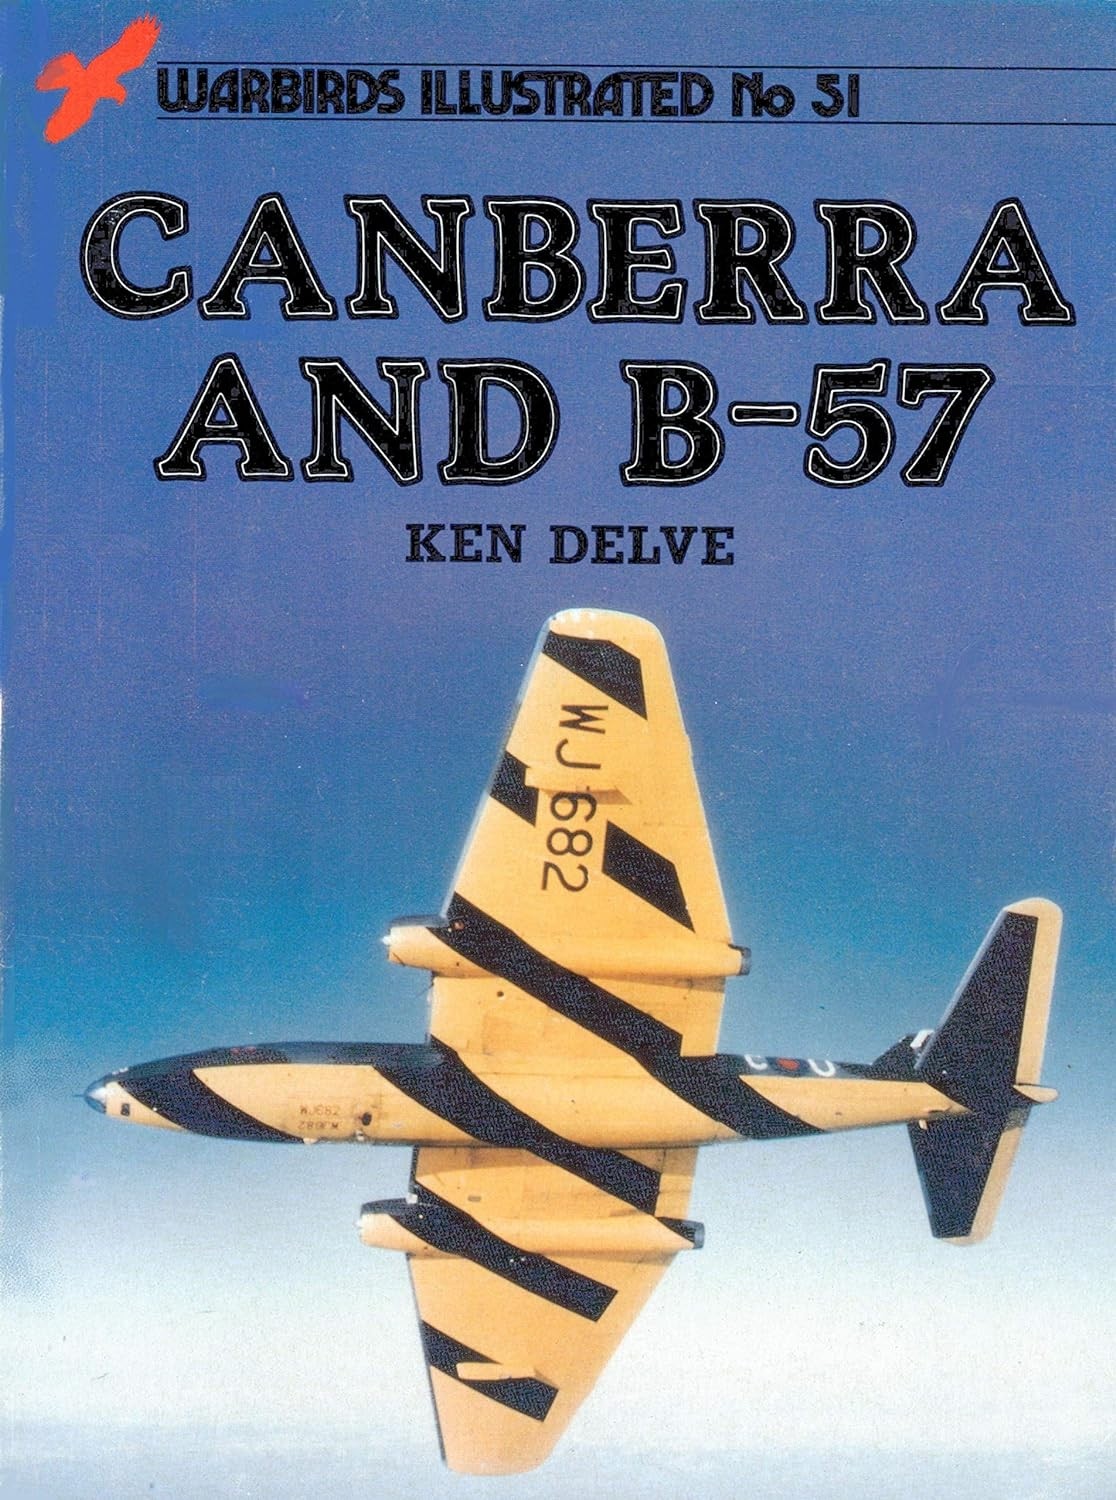 Canberra and B-57, Warbirds ill. no.51